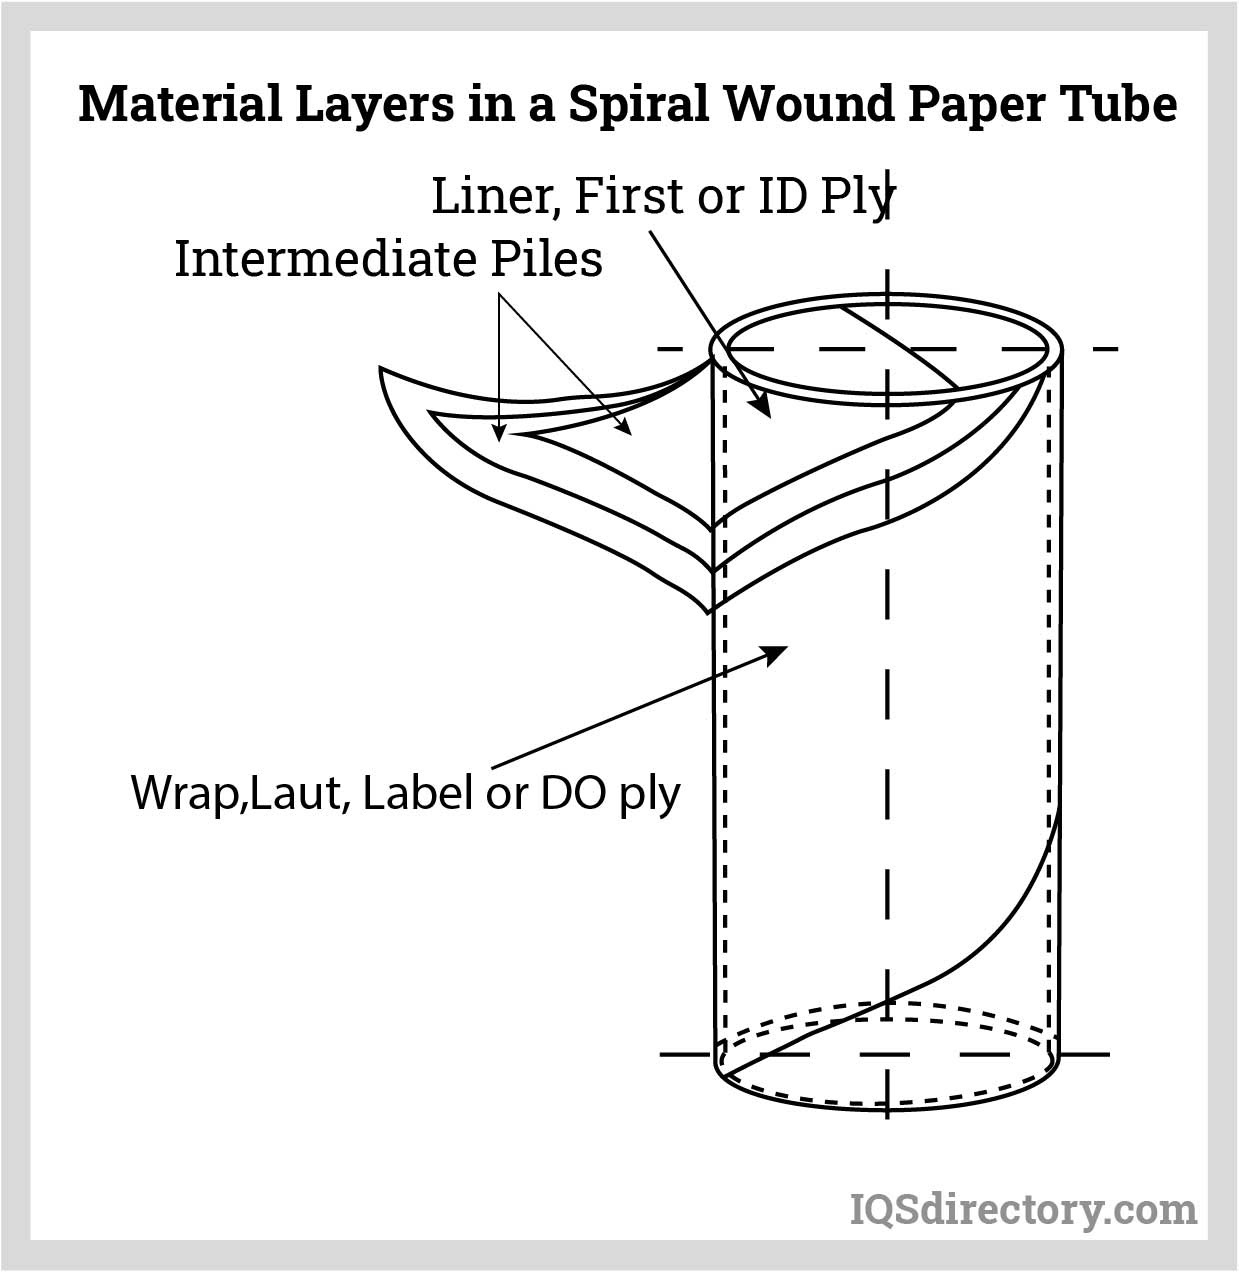 https://www.iqsdirectory.com/articles/cardboard-tube/paper-tube/material-layers-in-a-spiral-wound-paper-tube.jpg